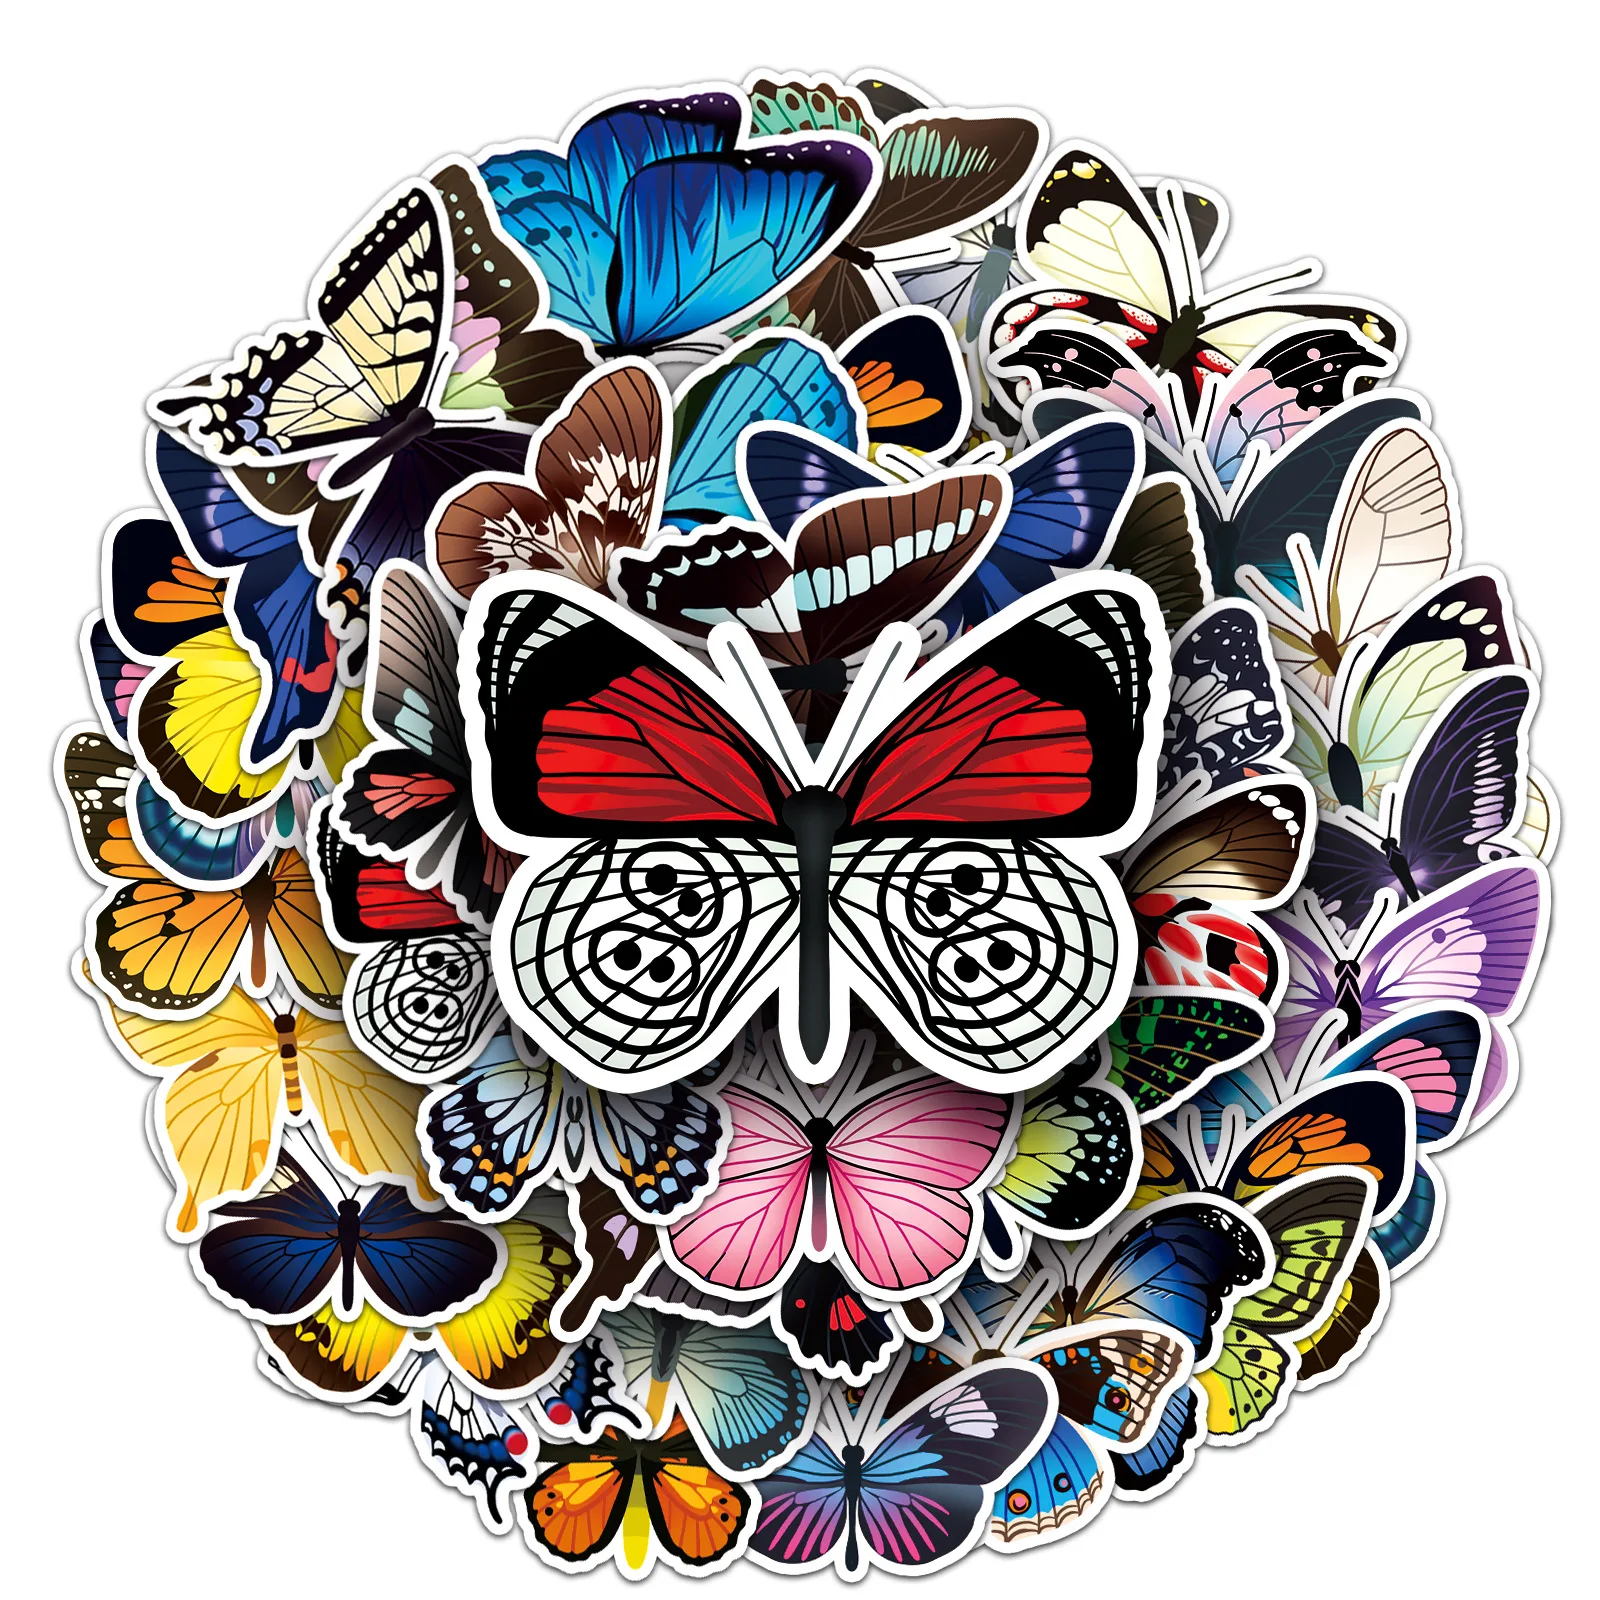 

50Pcs Butterfly Graffiti Stickers Animal Insect Decorative Decal DIY Phone Laptop Luggage Diary Journal Scrapbooking Kids Toy B2